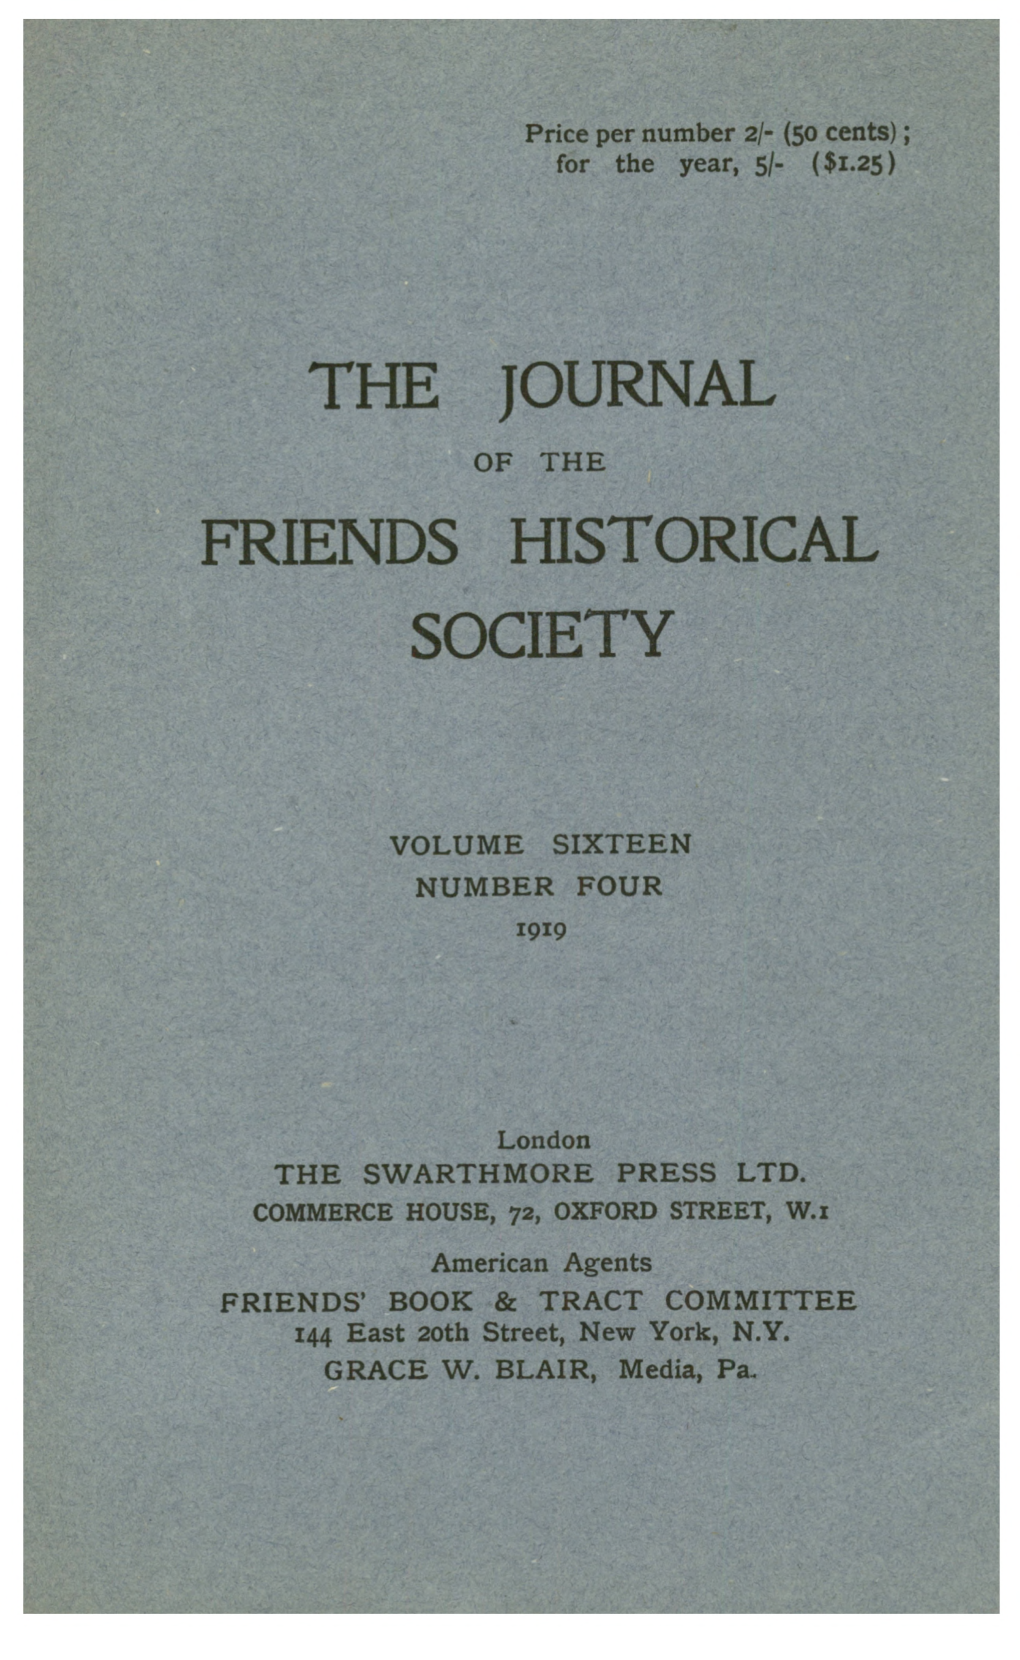 American Agents FRIENDS' BOOK & TRACT COMMITTEE 144 East 20Th Street, New York, N.Y